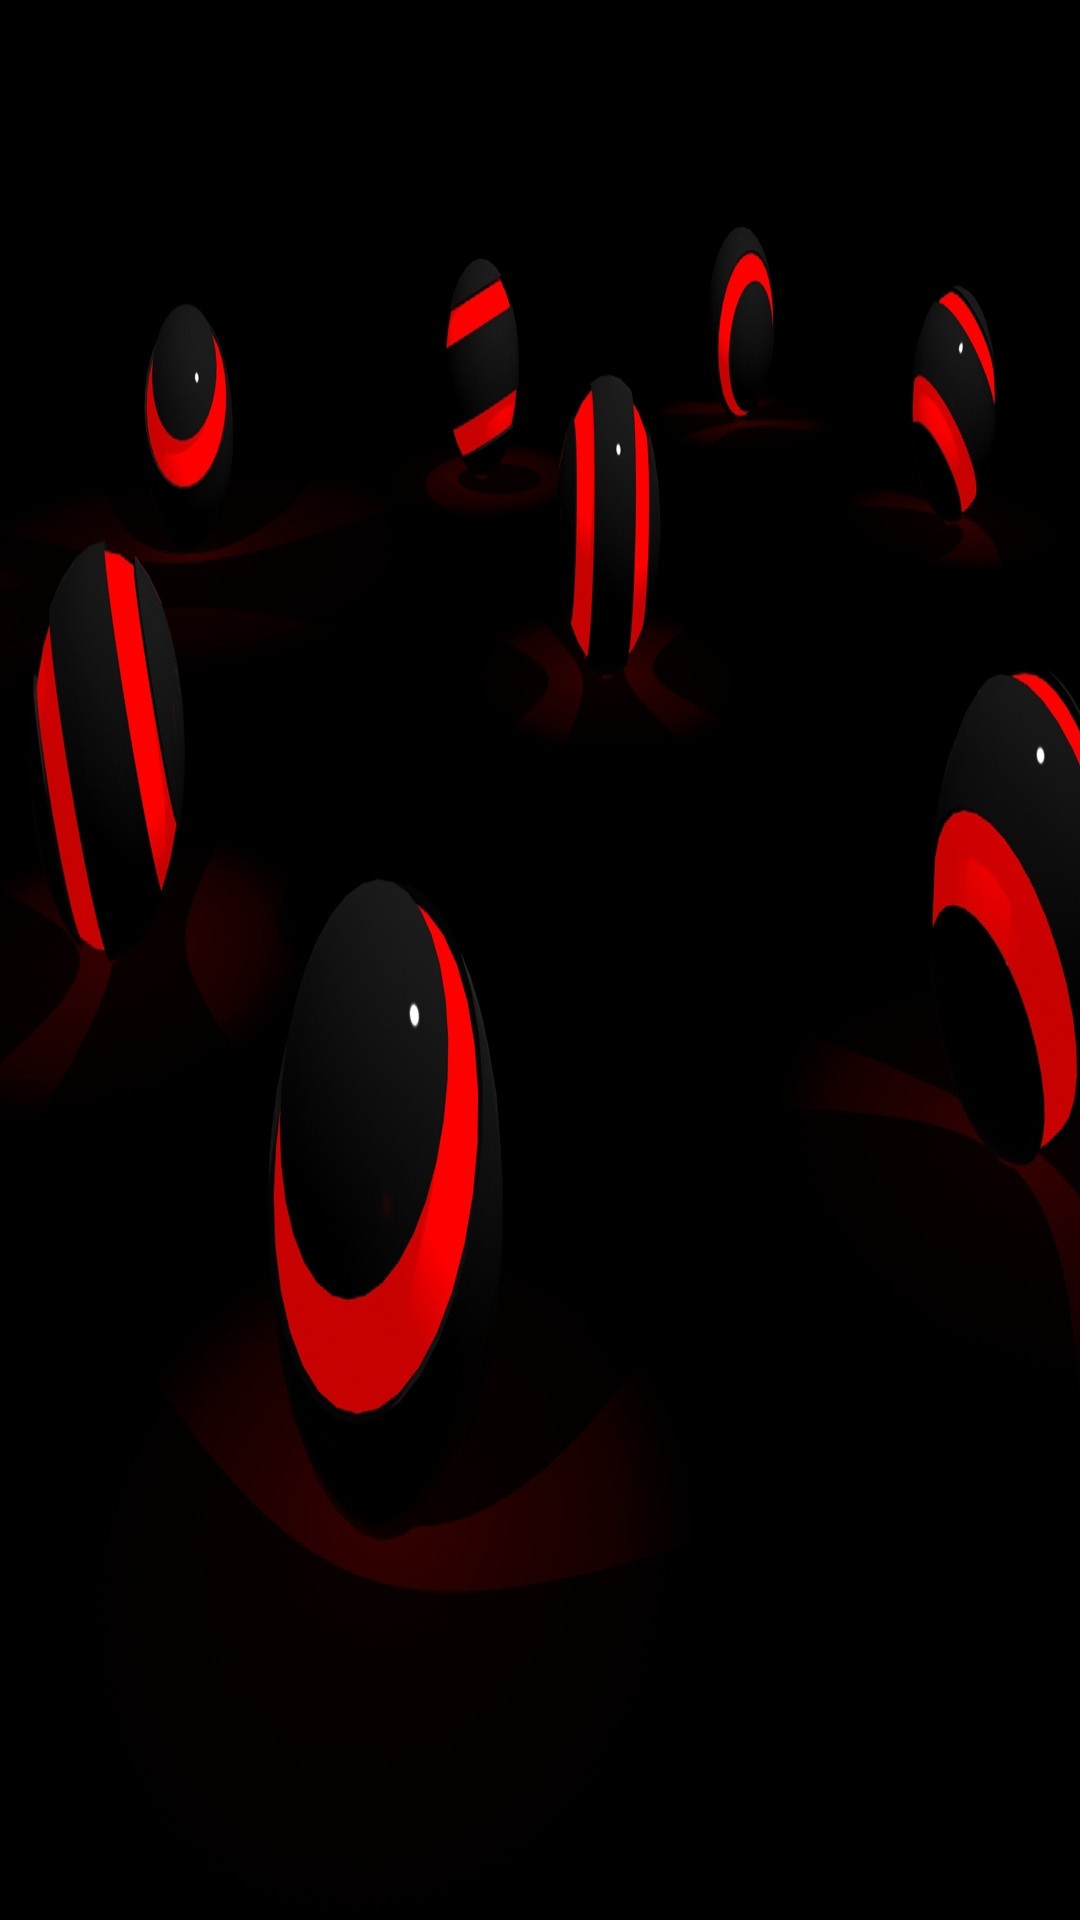 1080x1920 Red And Black Iphone Wallpaper